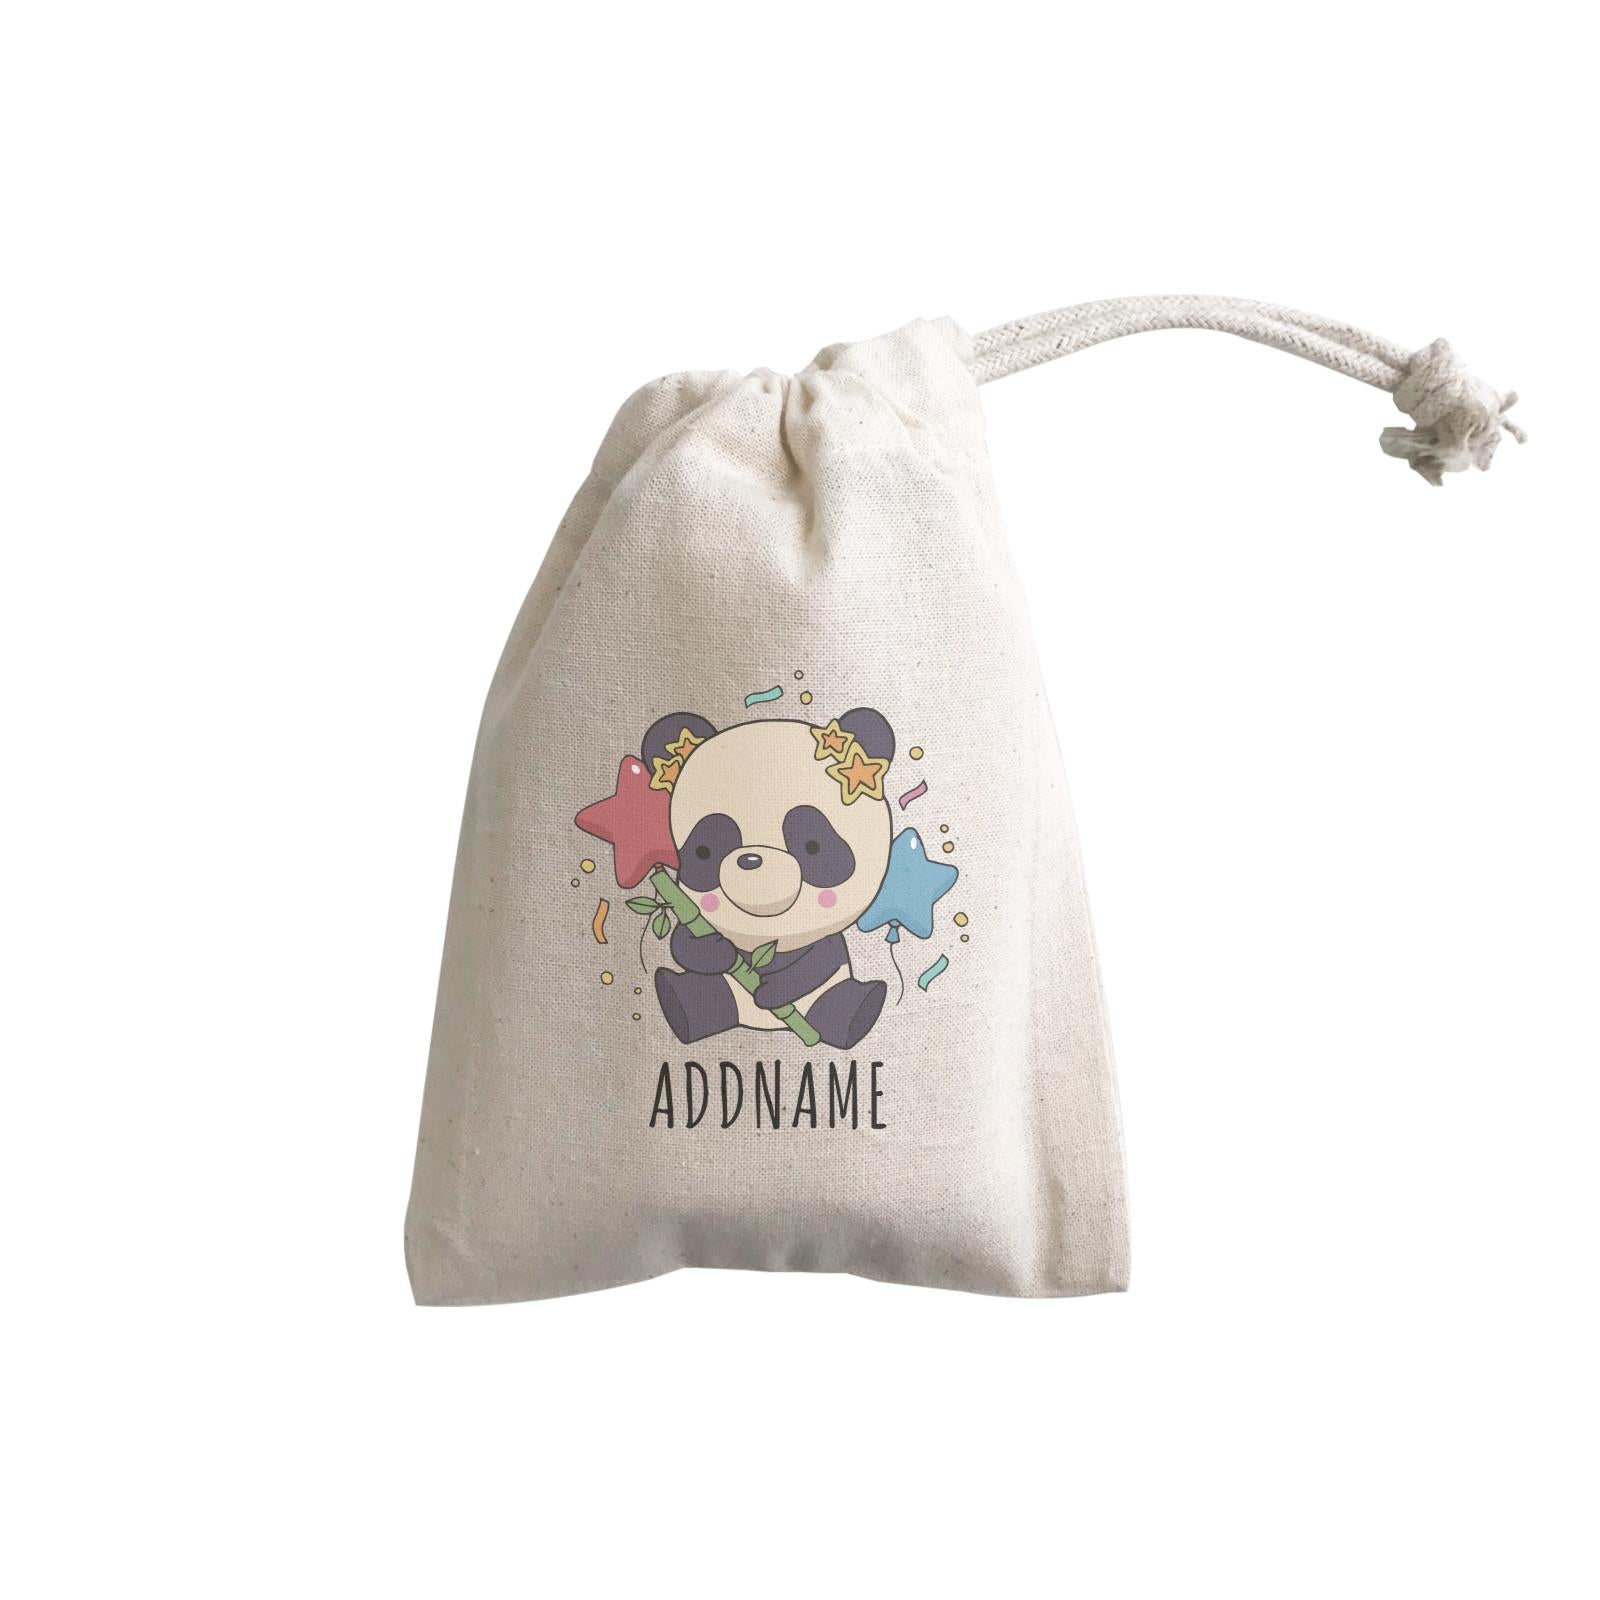 Birthday Sketch Animals Panda with Party Hat Holding Bamboo Addname GP Gift Pouch